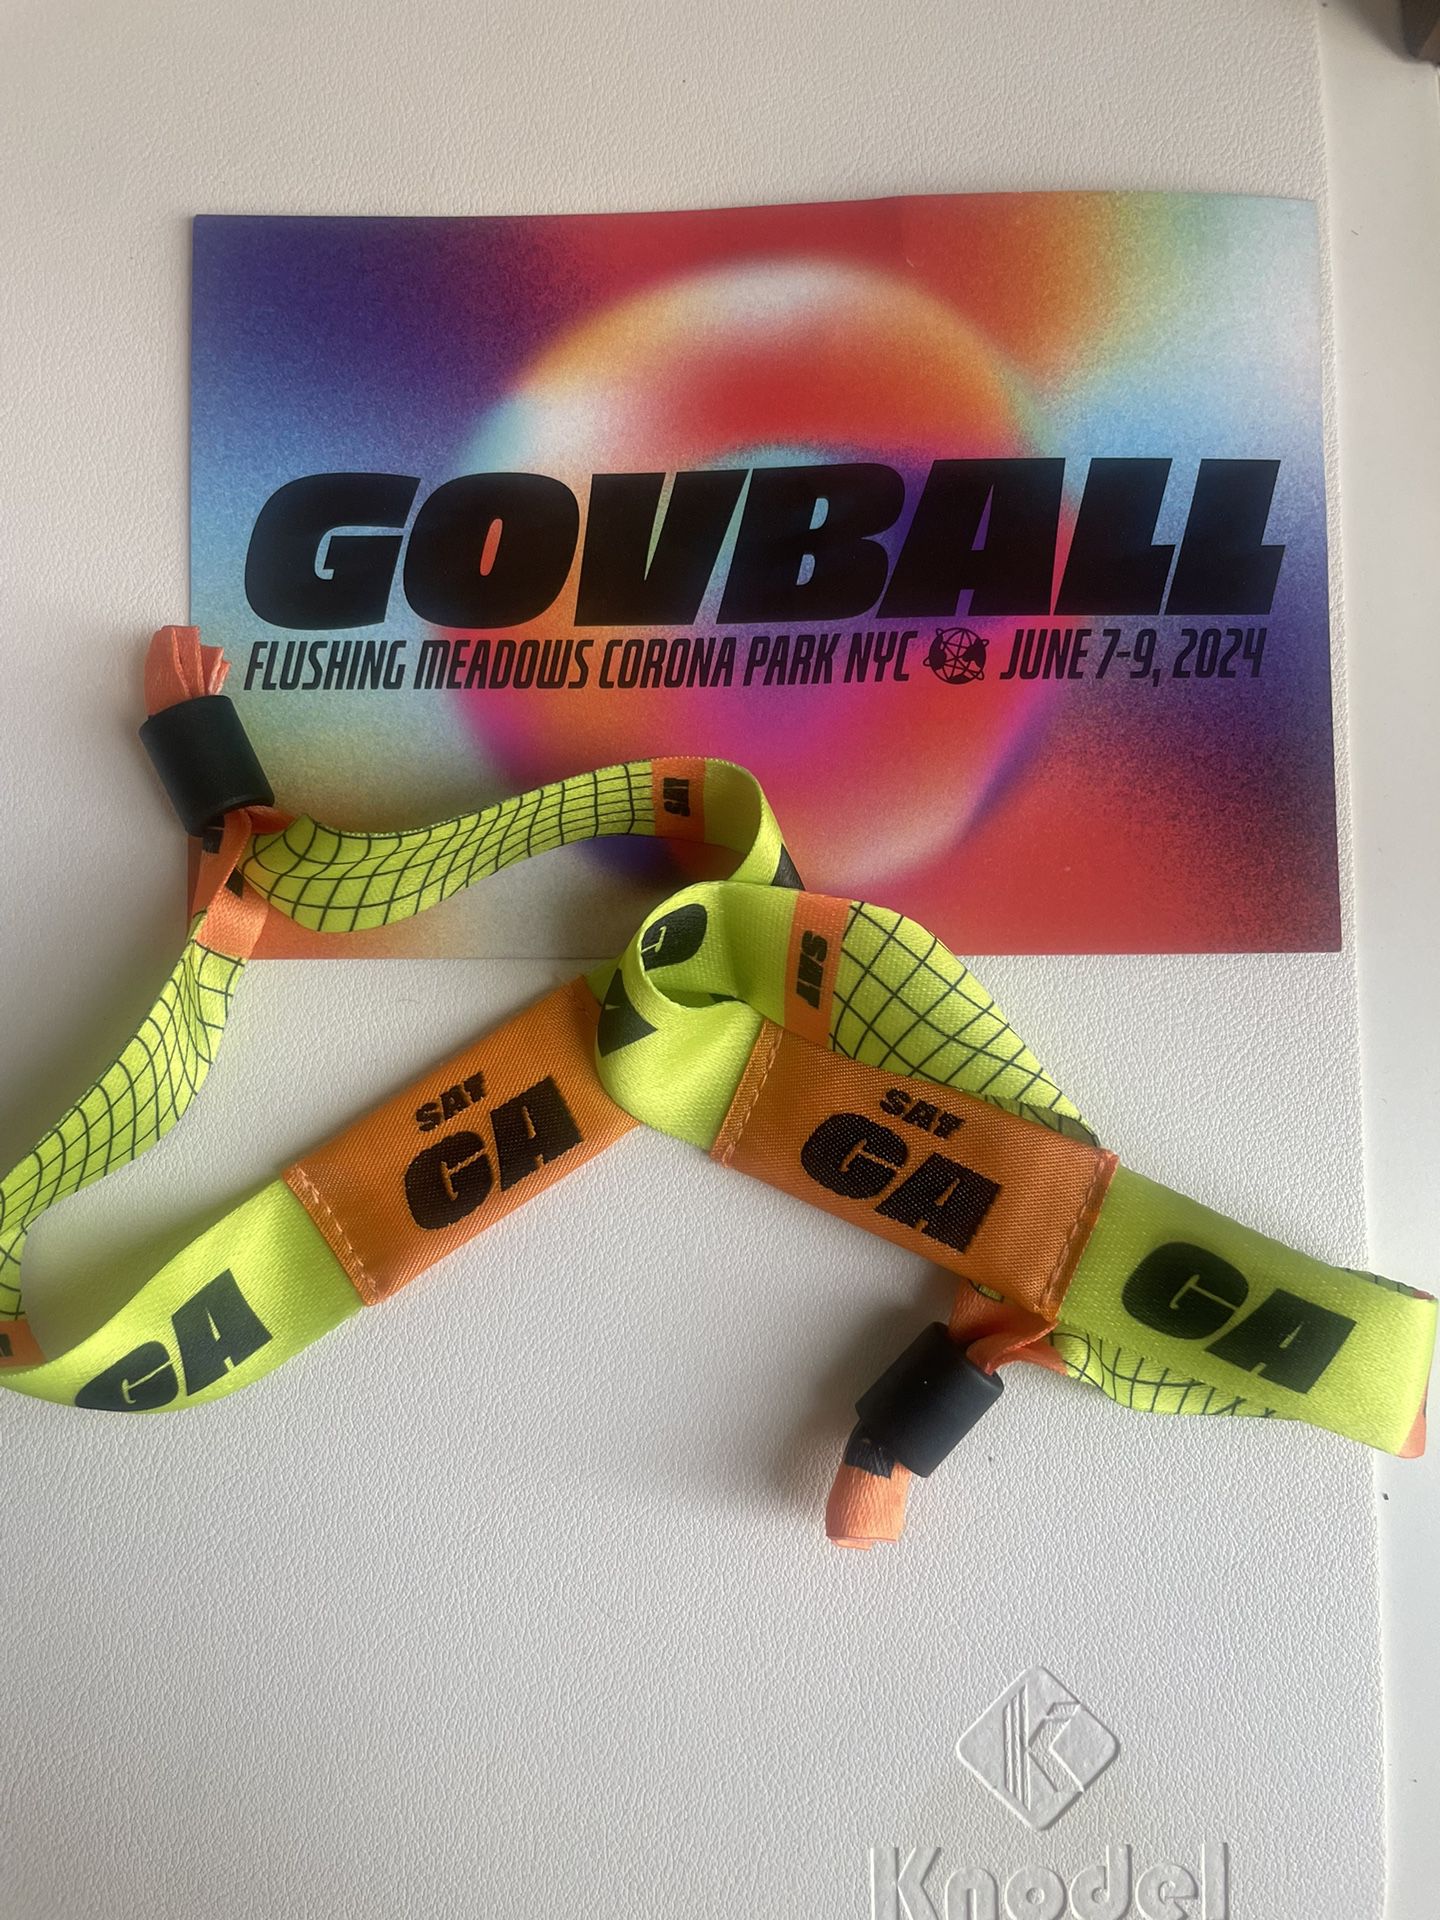 $250 For Two GA Day 2 Govball Wristbands